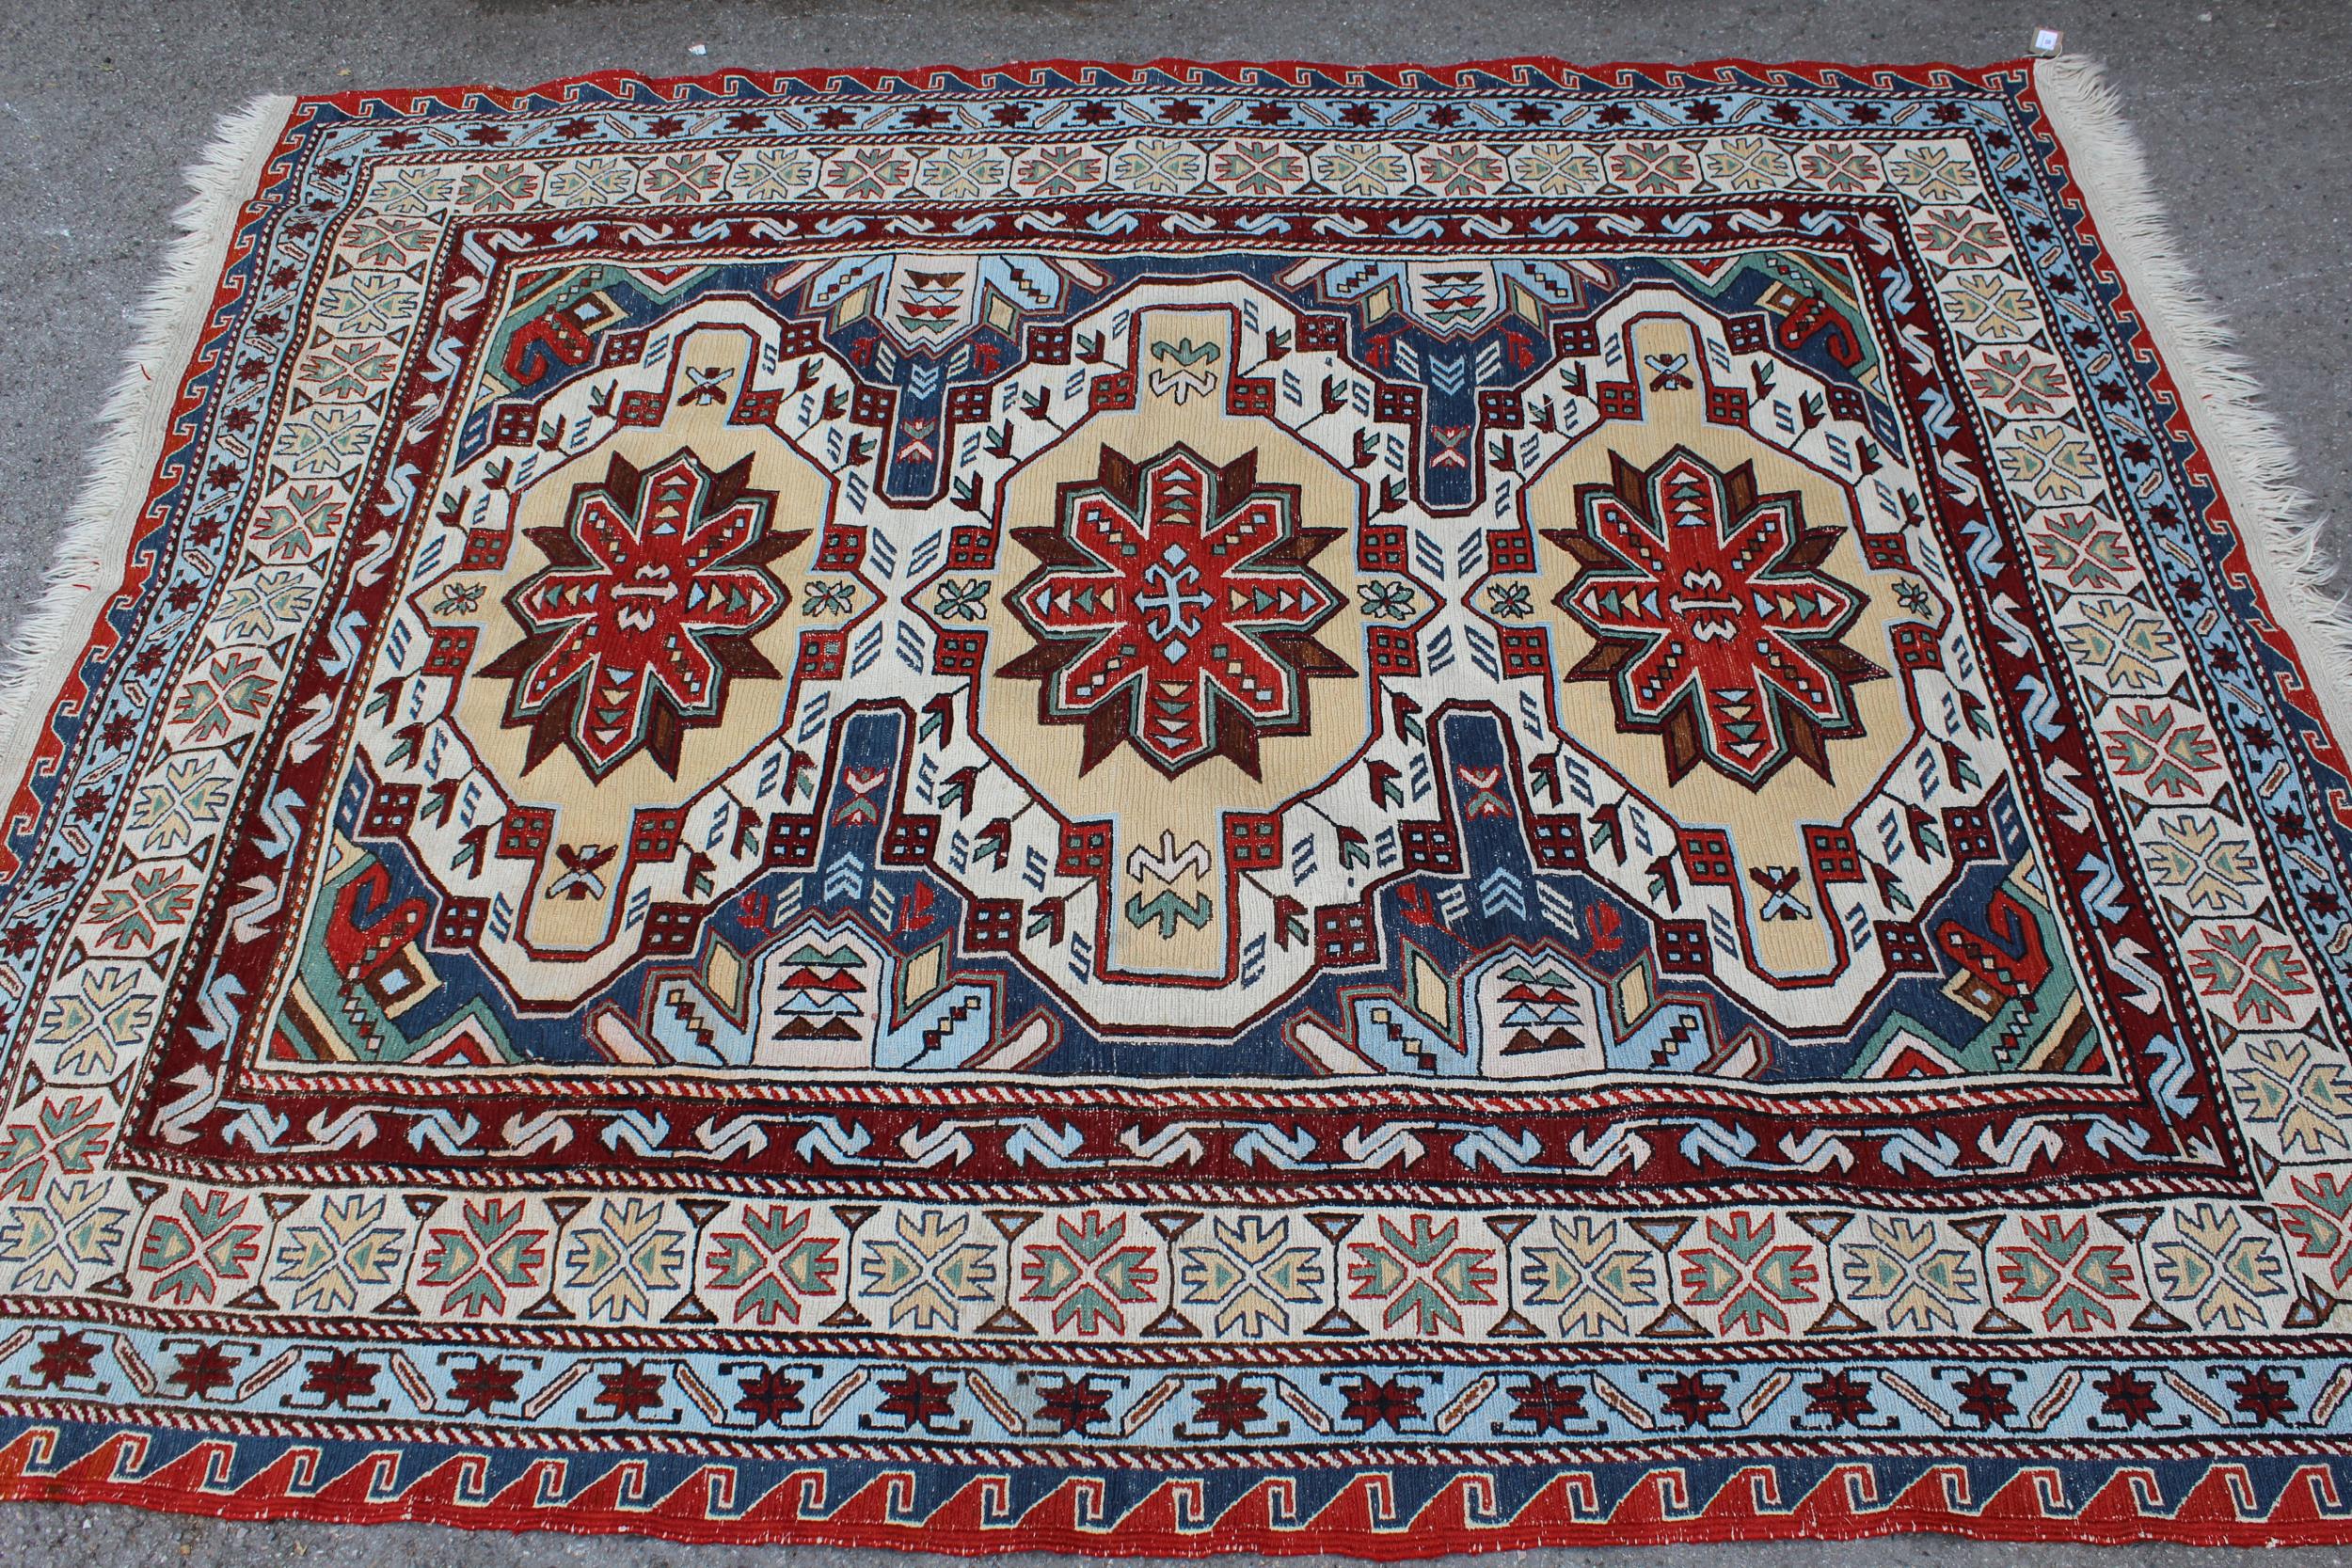 Caucasian flatweave rug of Soumak type, with a triple medallion design in shades of red, yellow